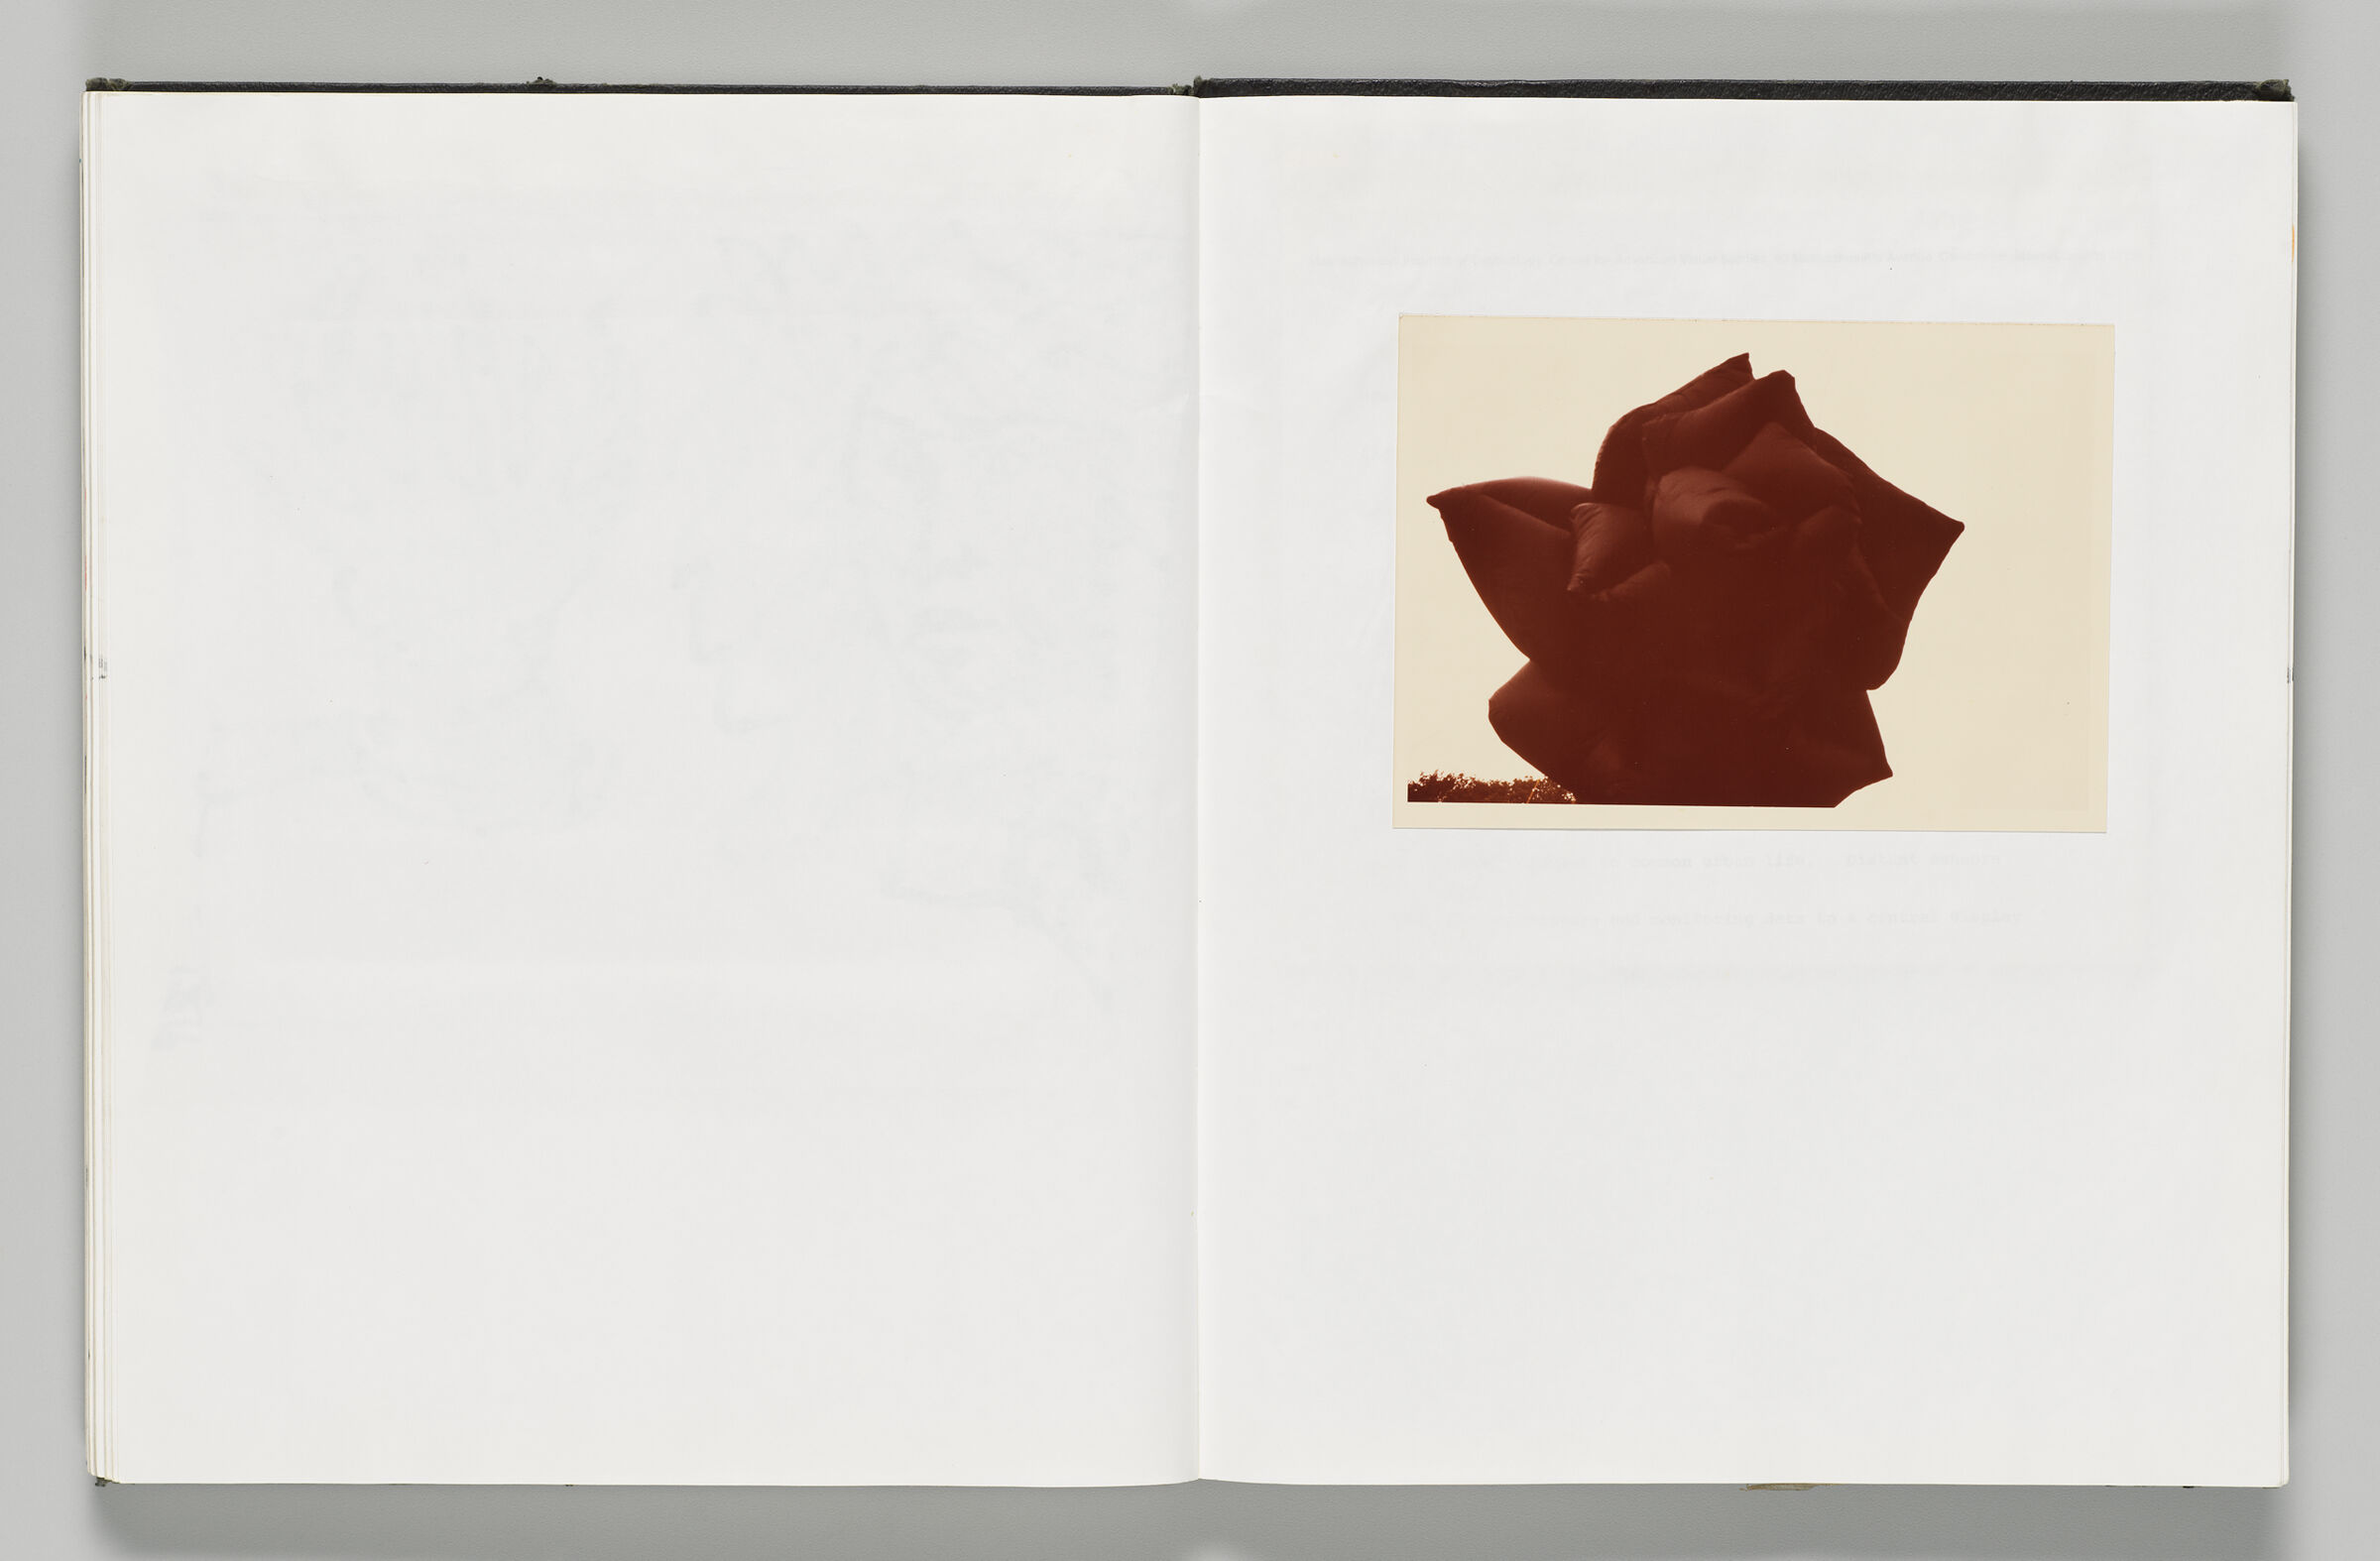 Untitled (Blank, Left Page); Untitled (Adhered Photograph Of Inflatable [Black Rose?], Right Page)